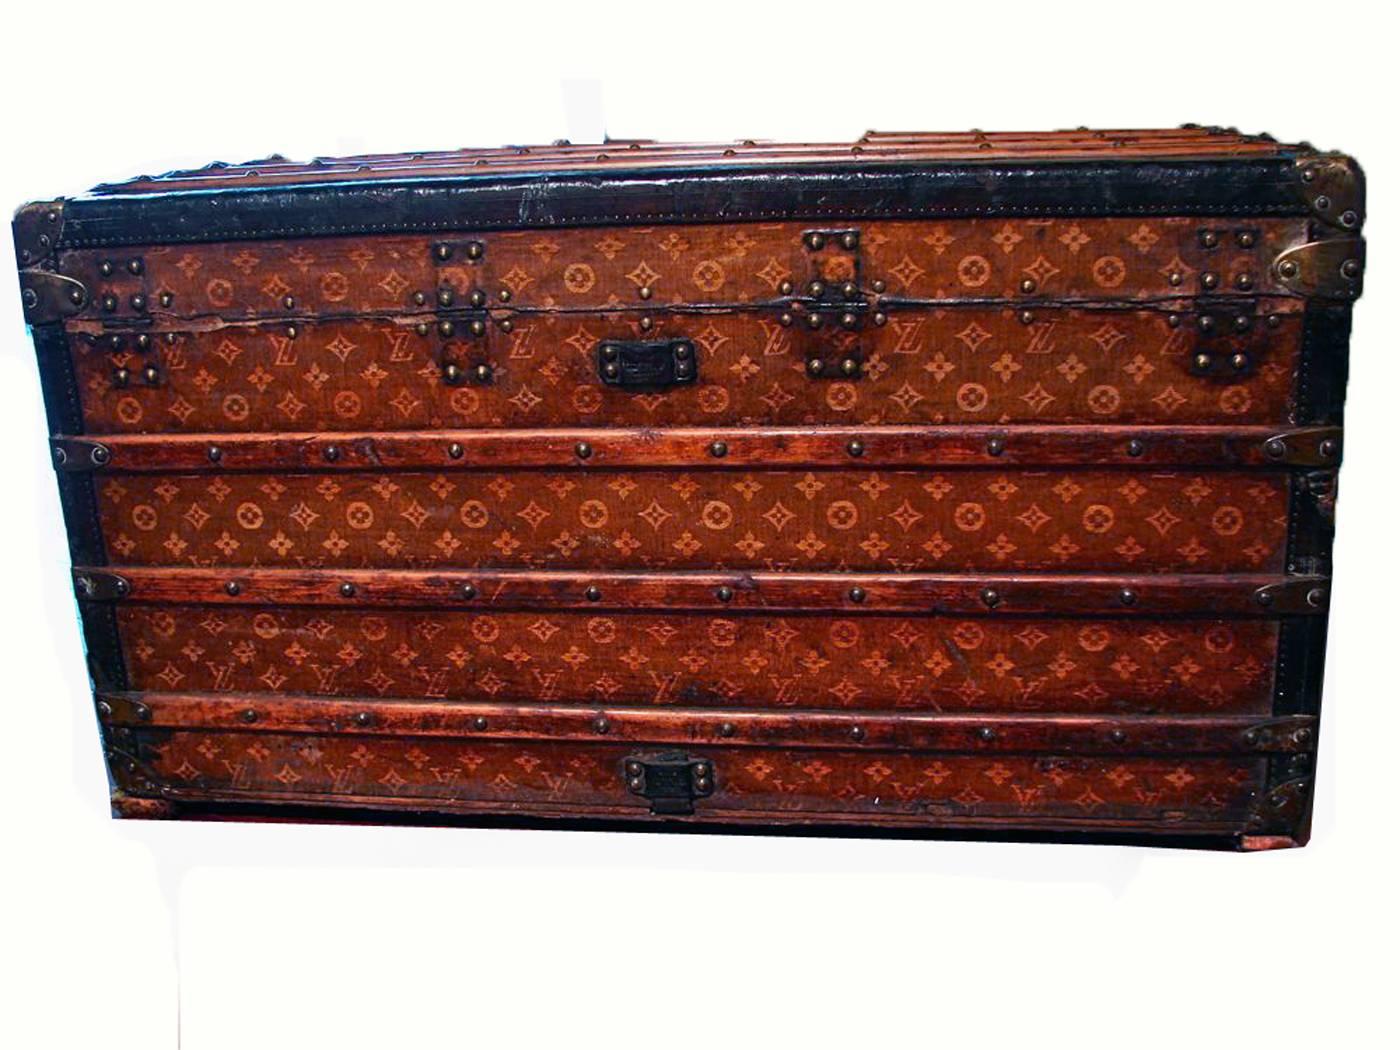 This iconic steamer trunk dates to the early 1900s and is made from Vuitton's monogram canvas (handwoven, which is typical of trunks made prior to 1905), leather trim and brass hardware & handles.  The interior is lined in cream fabric and features